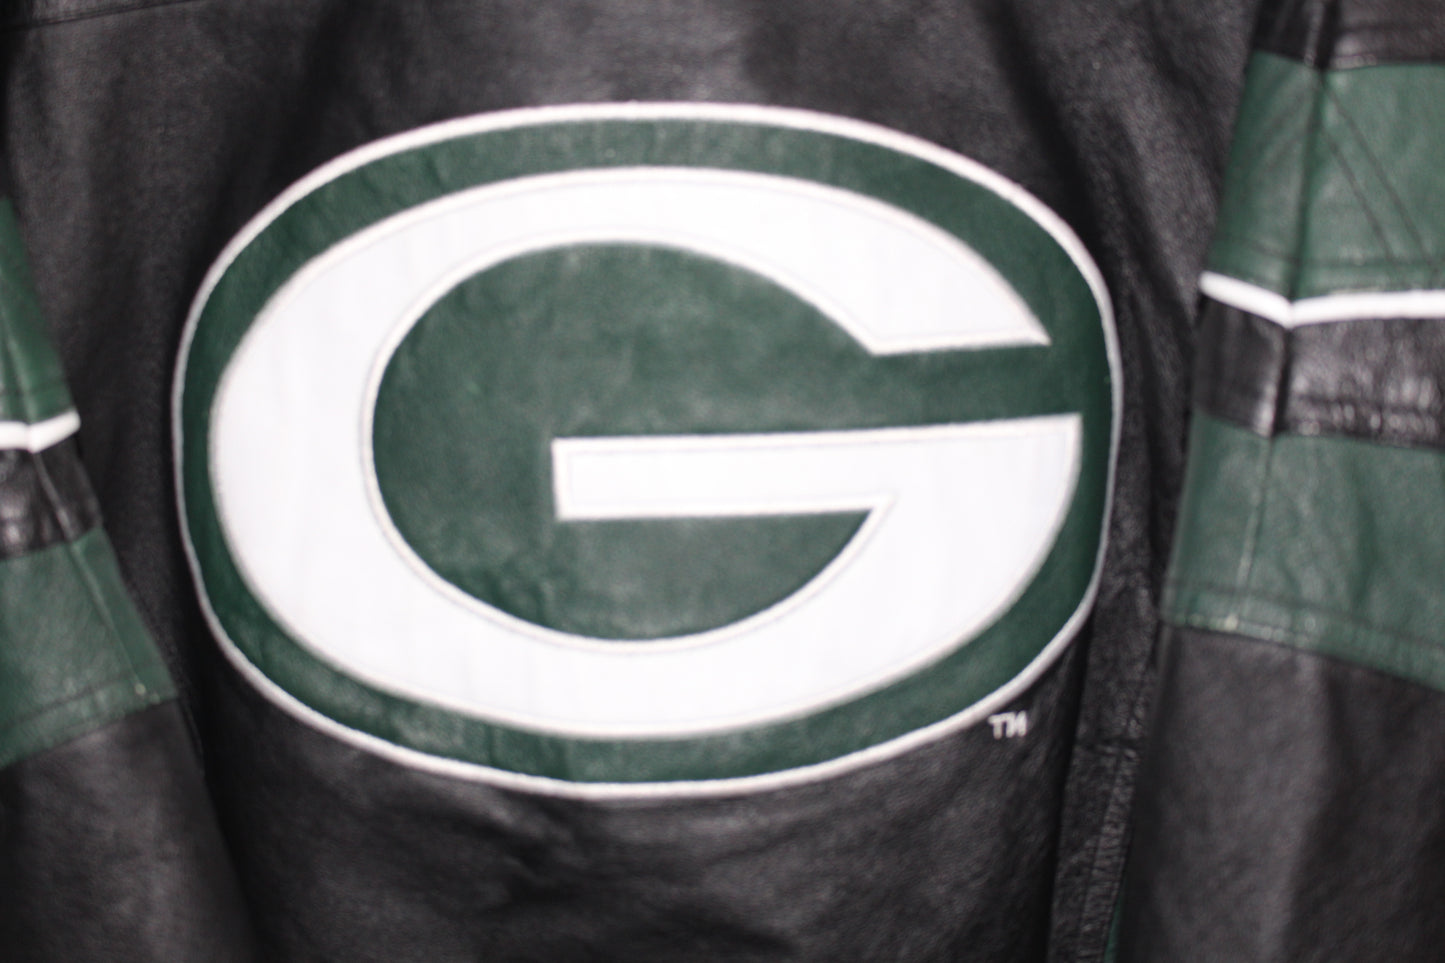 Green Bay Packers Pro Line Leather Starter Jacket (M)